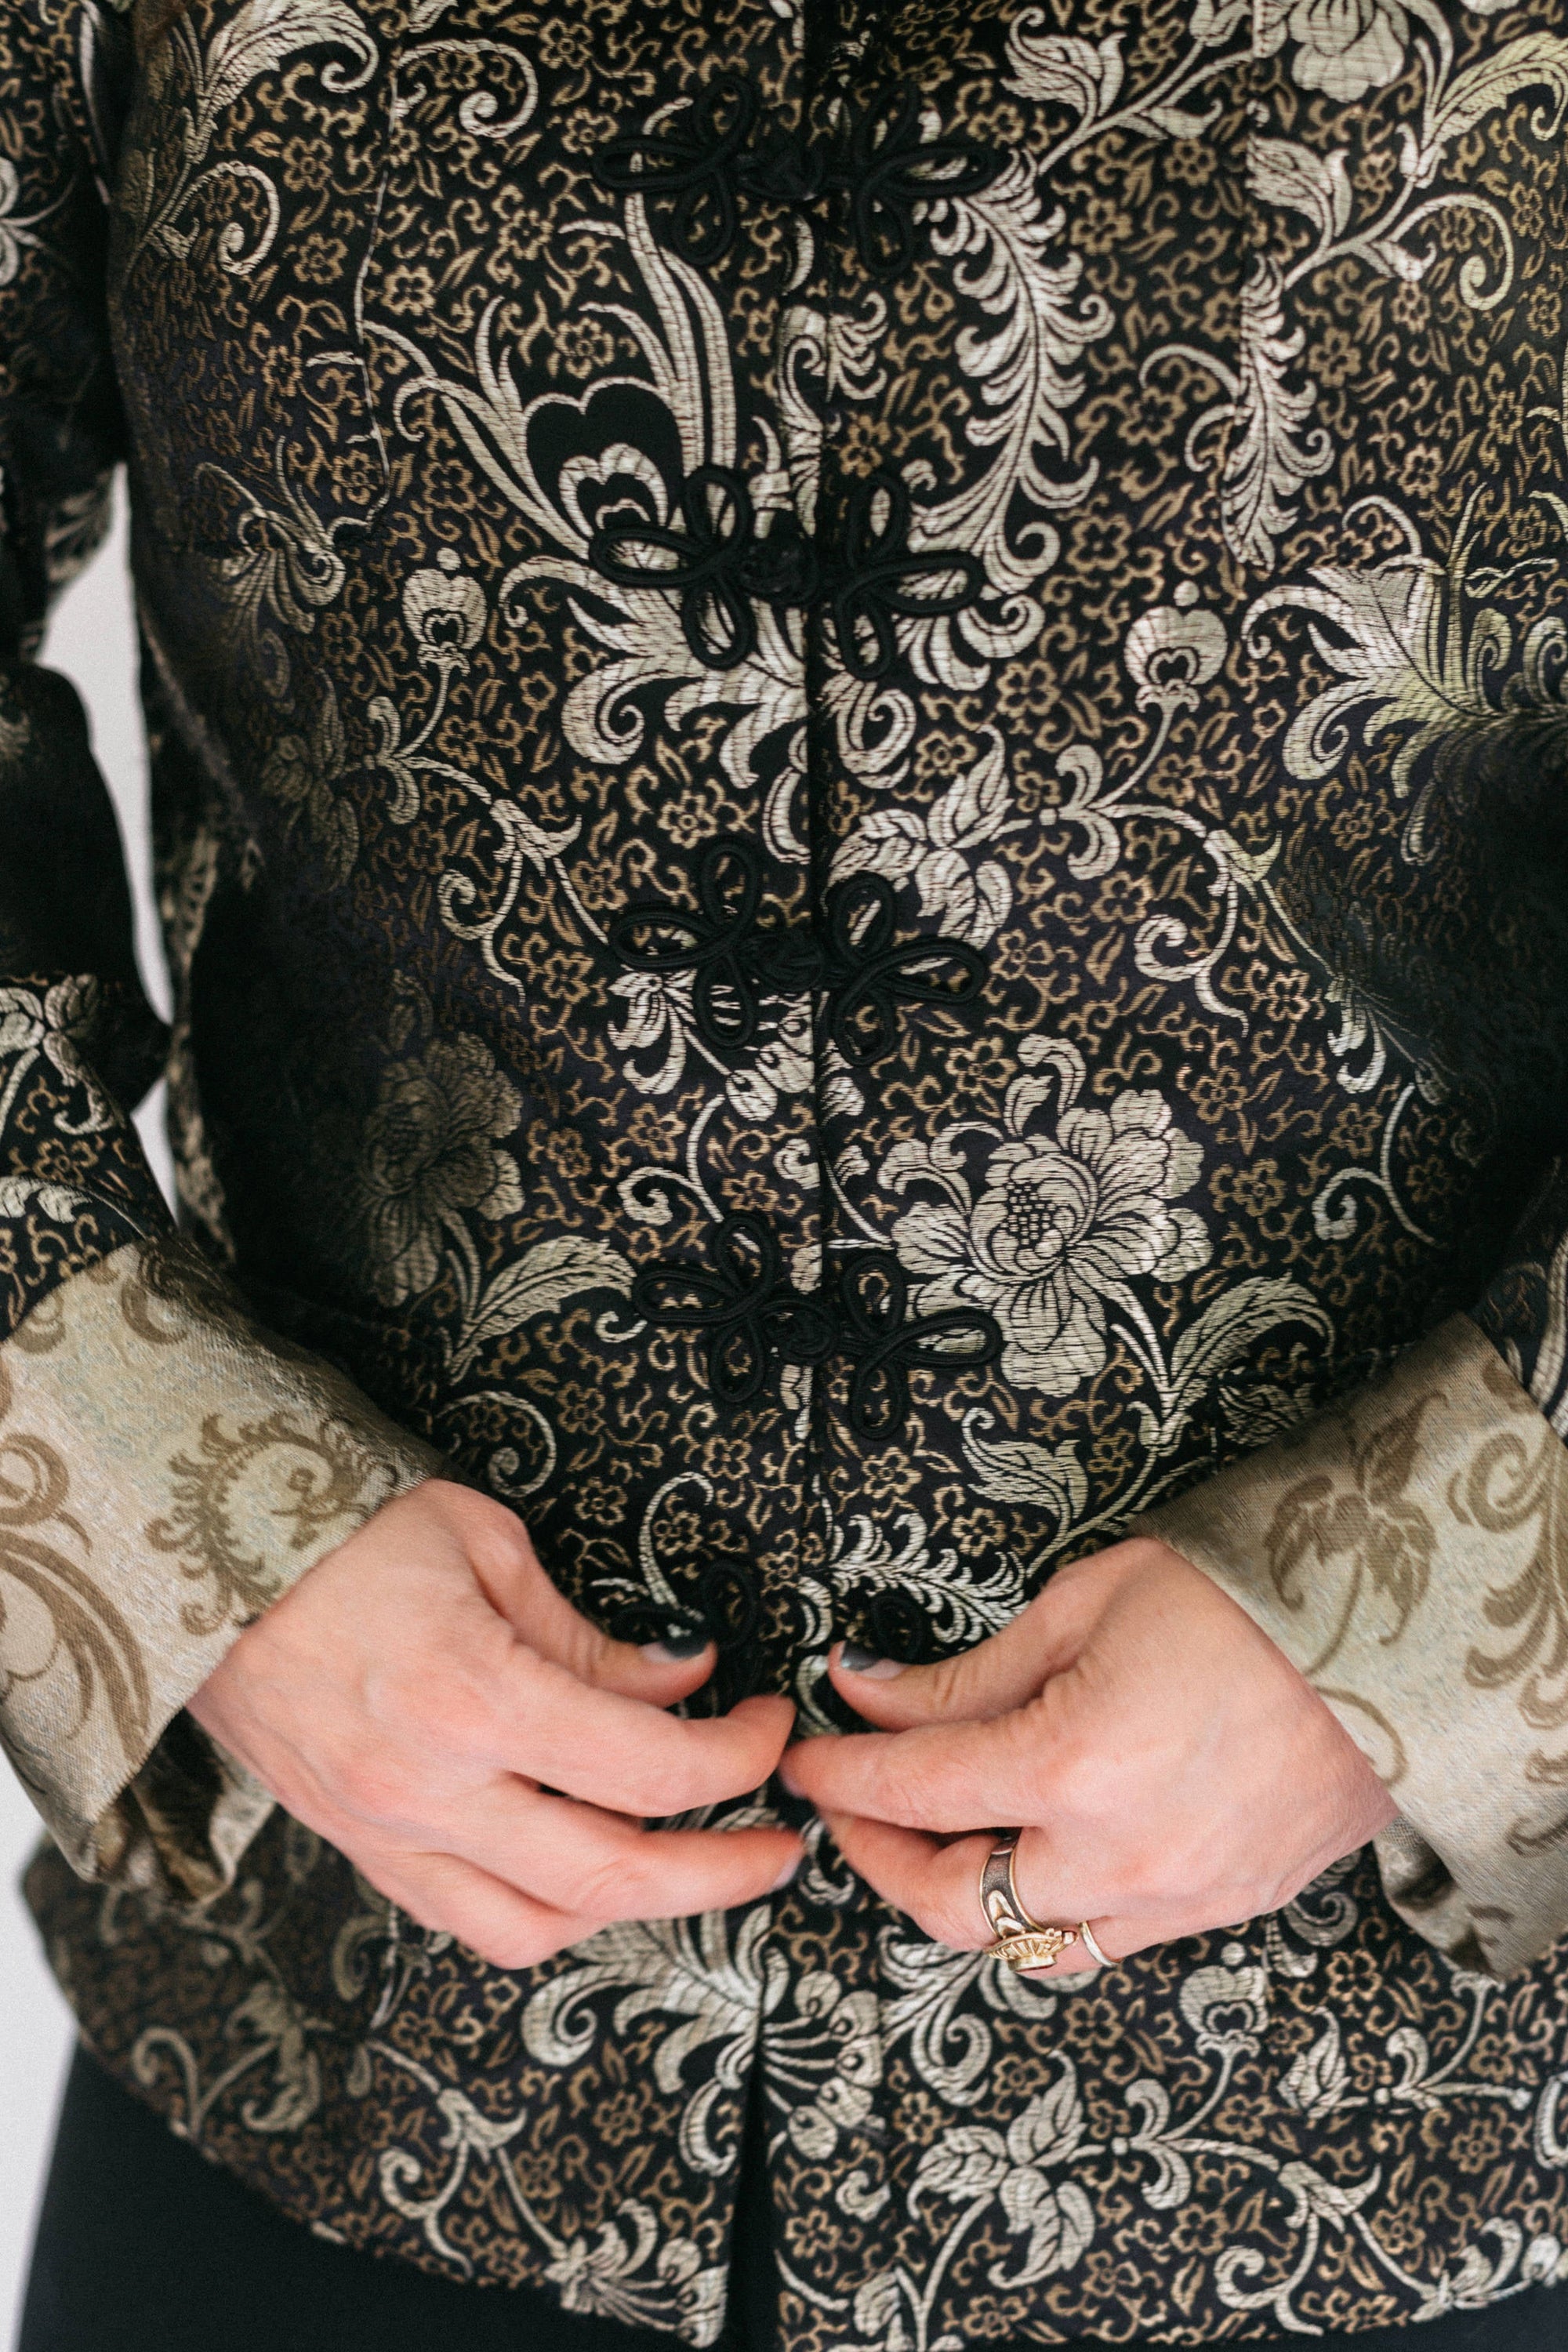 Close up of woman butting loop frog closures on the Chinese Pajama jacket.